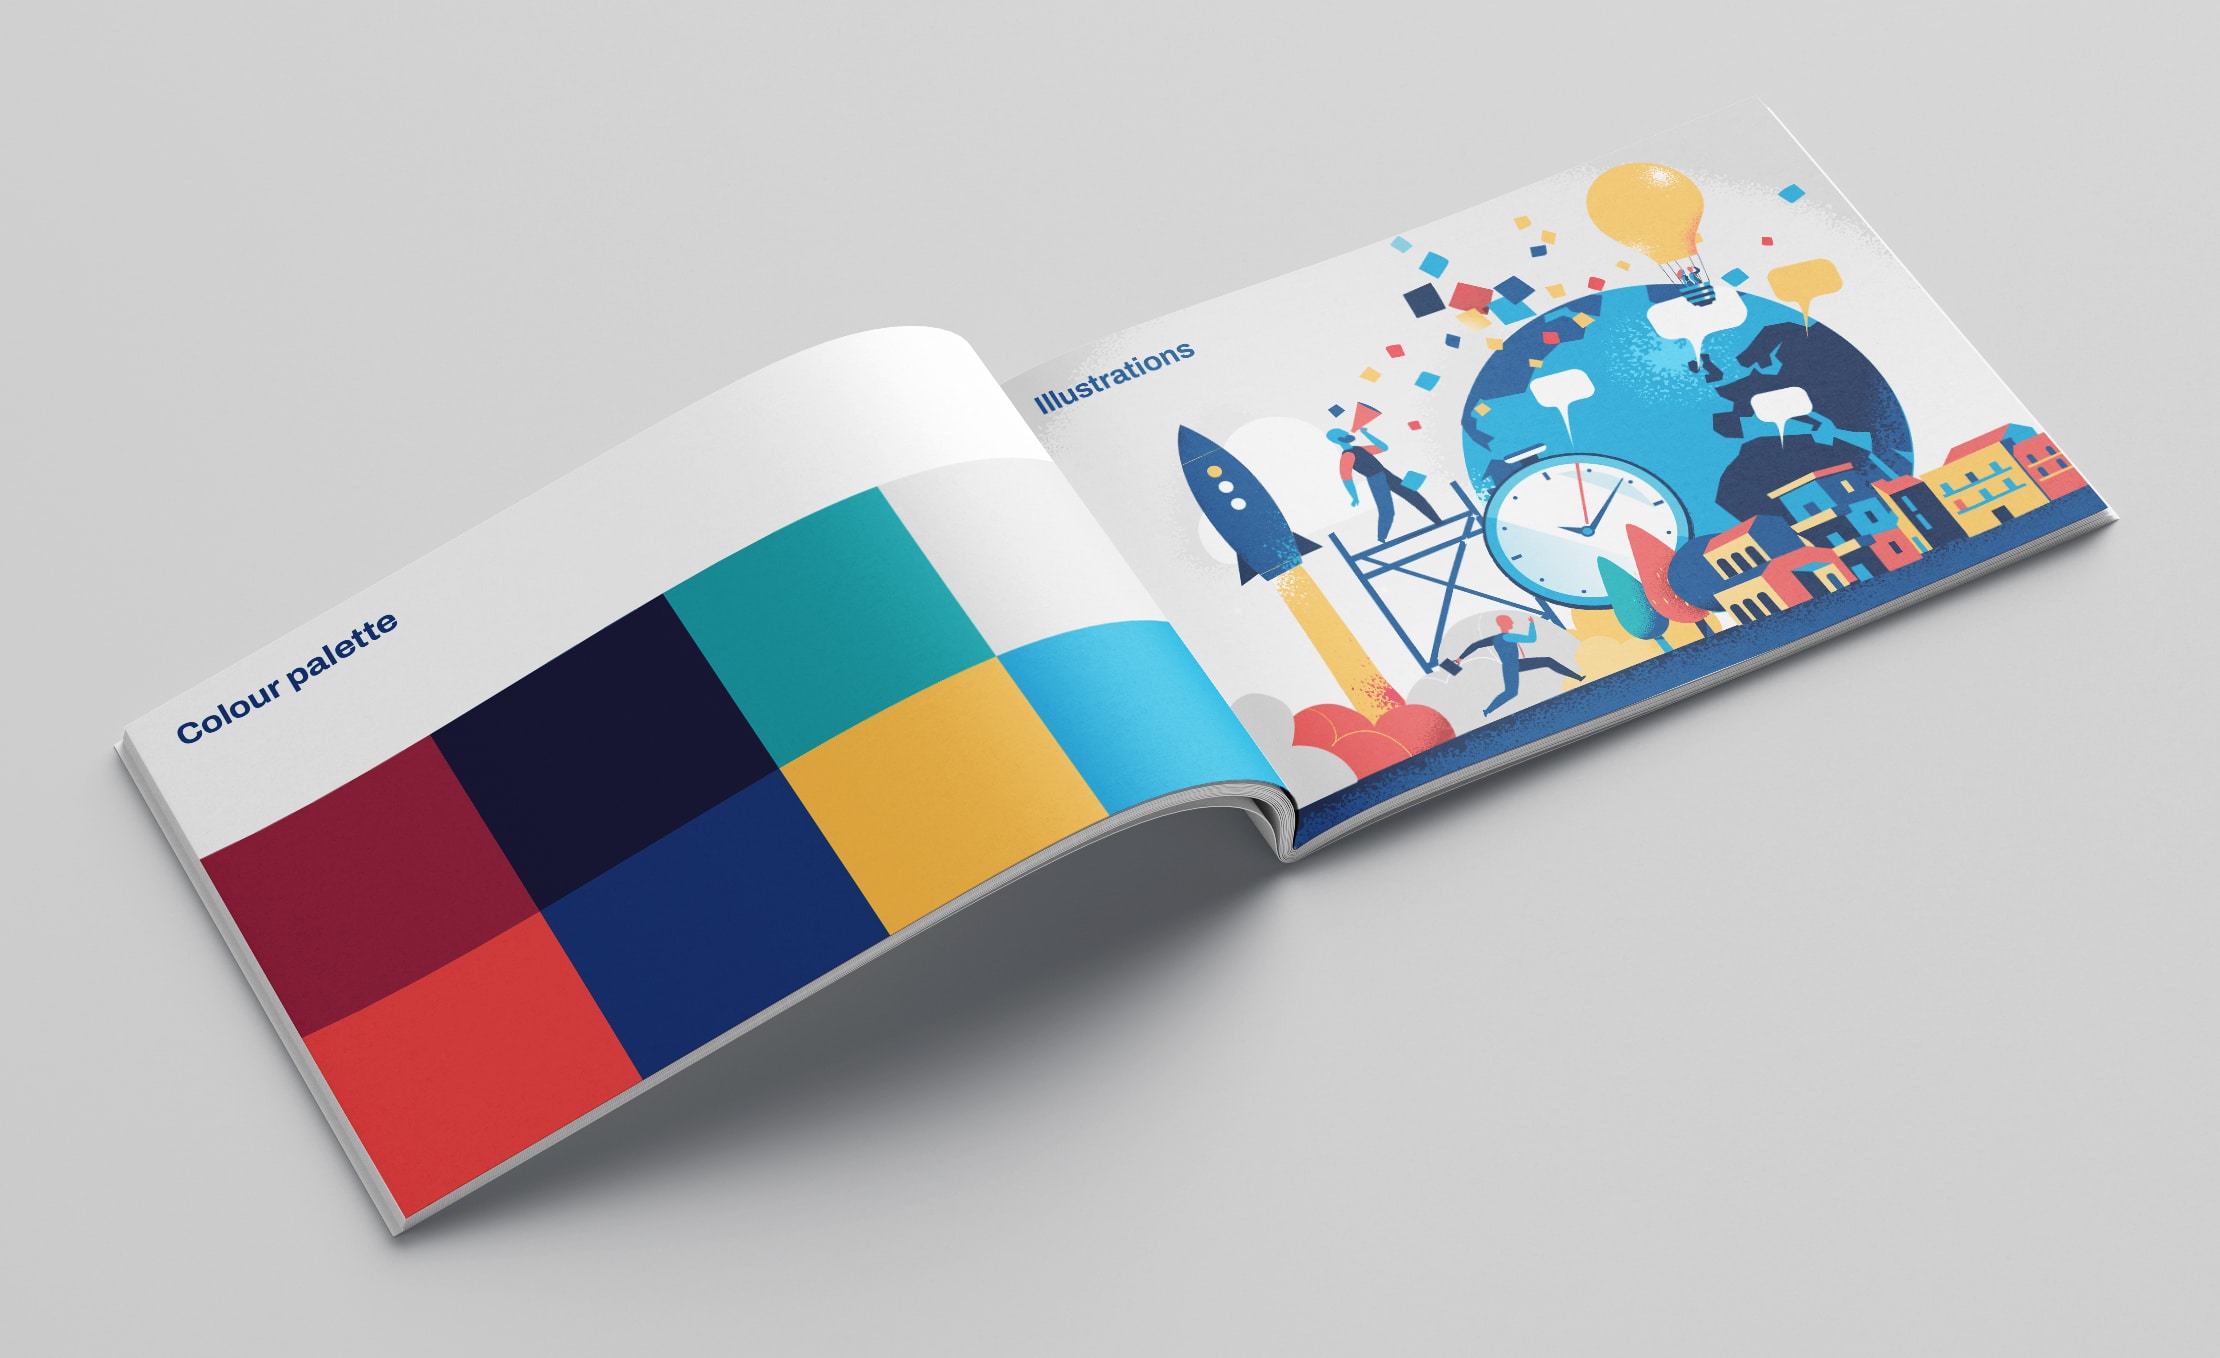 Brand guidelines booklet opened to a 'Colour Palette' page with six swatches on the left, and an 'Illustrations' page on the right featuring stylised graphics including a rocket, figures, and a globe in the palette colours.